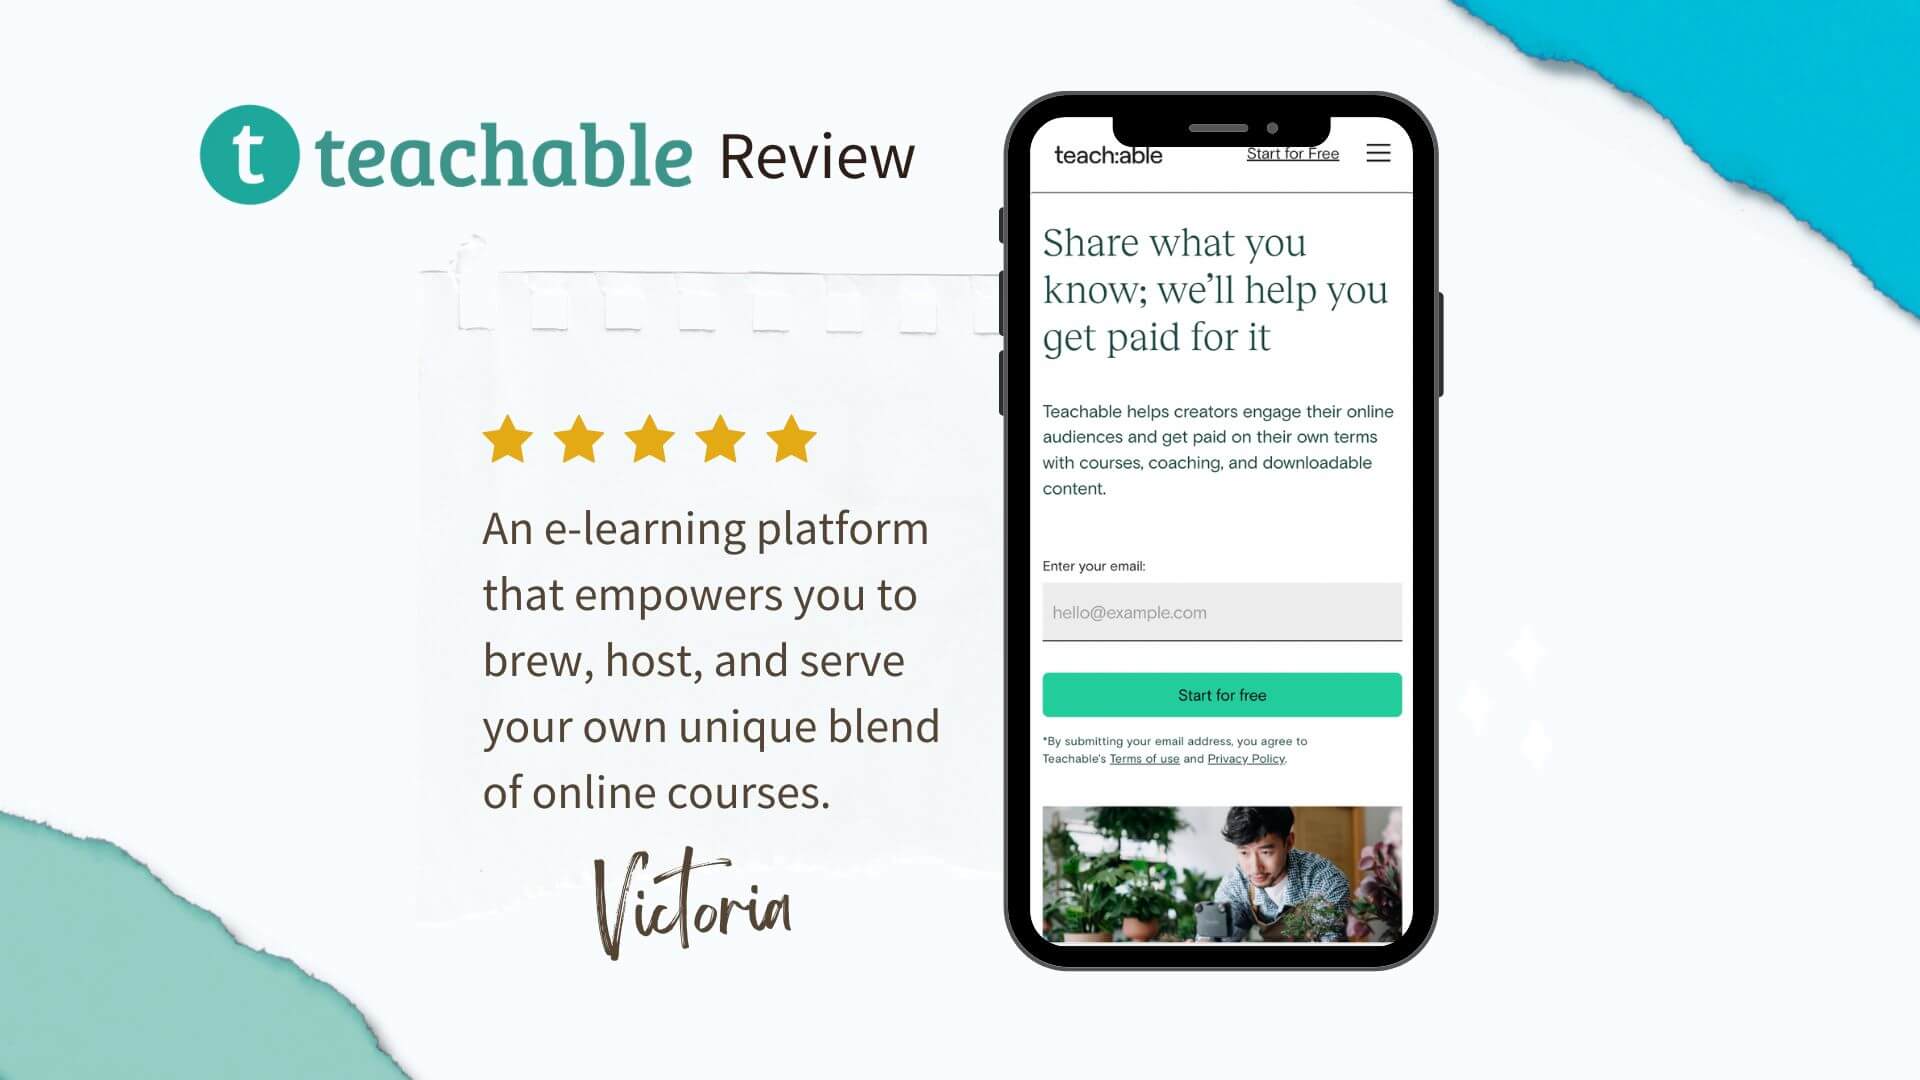 Teachable review